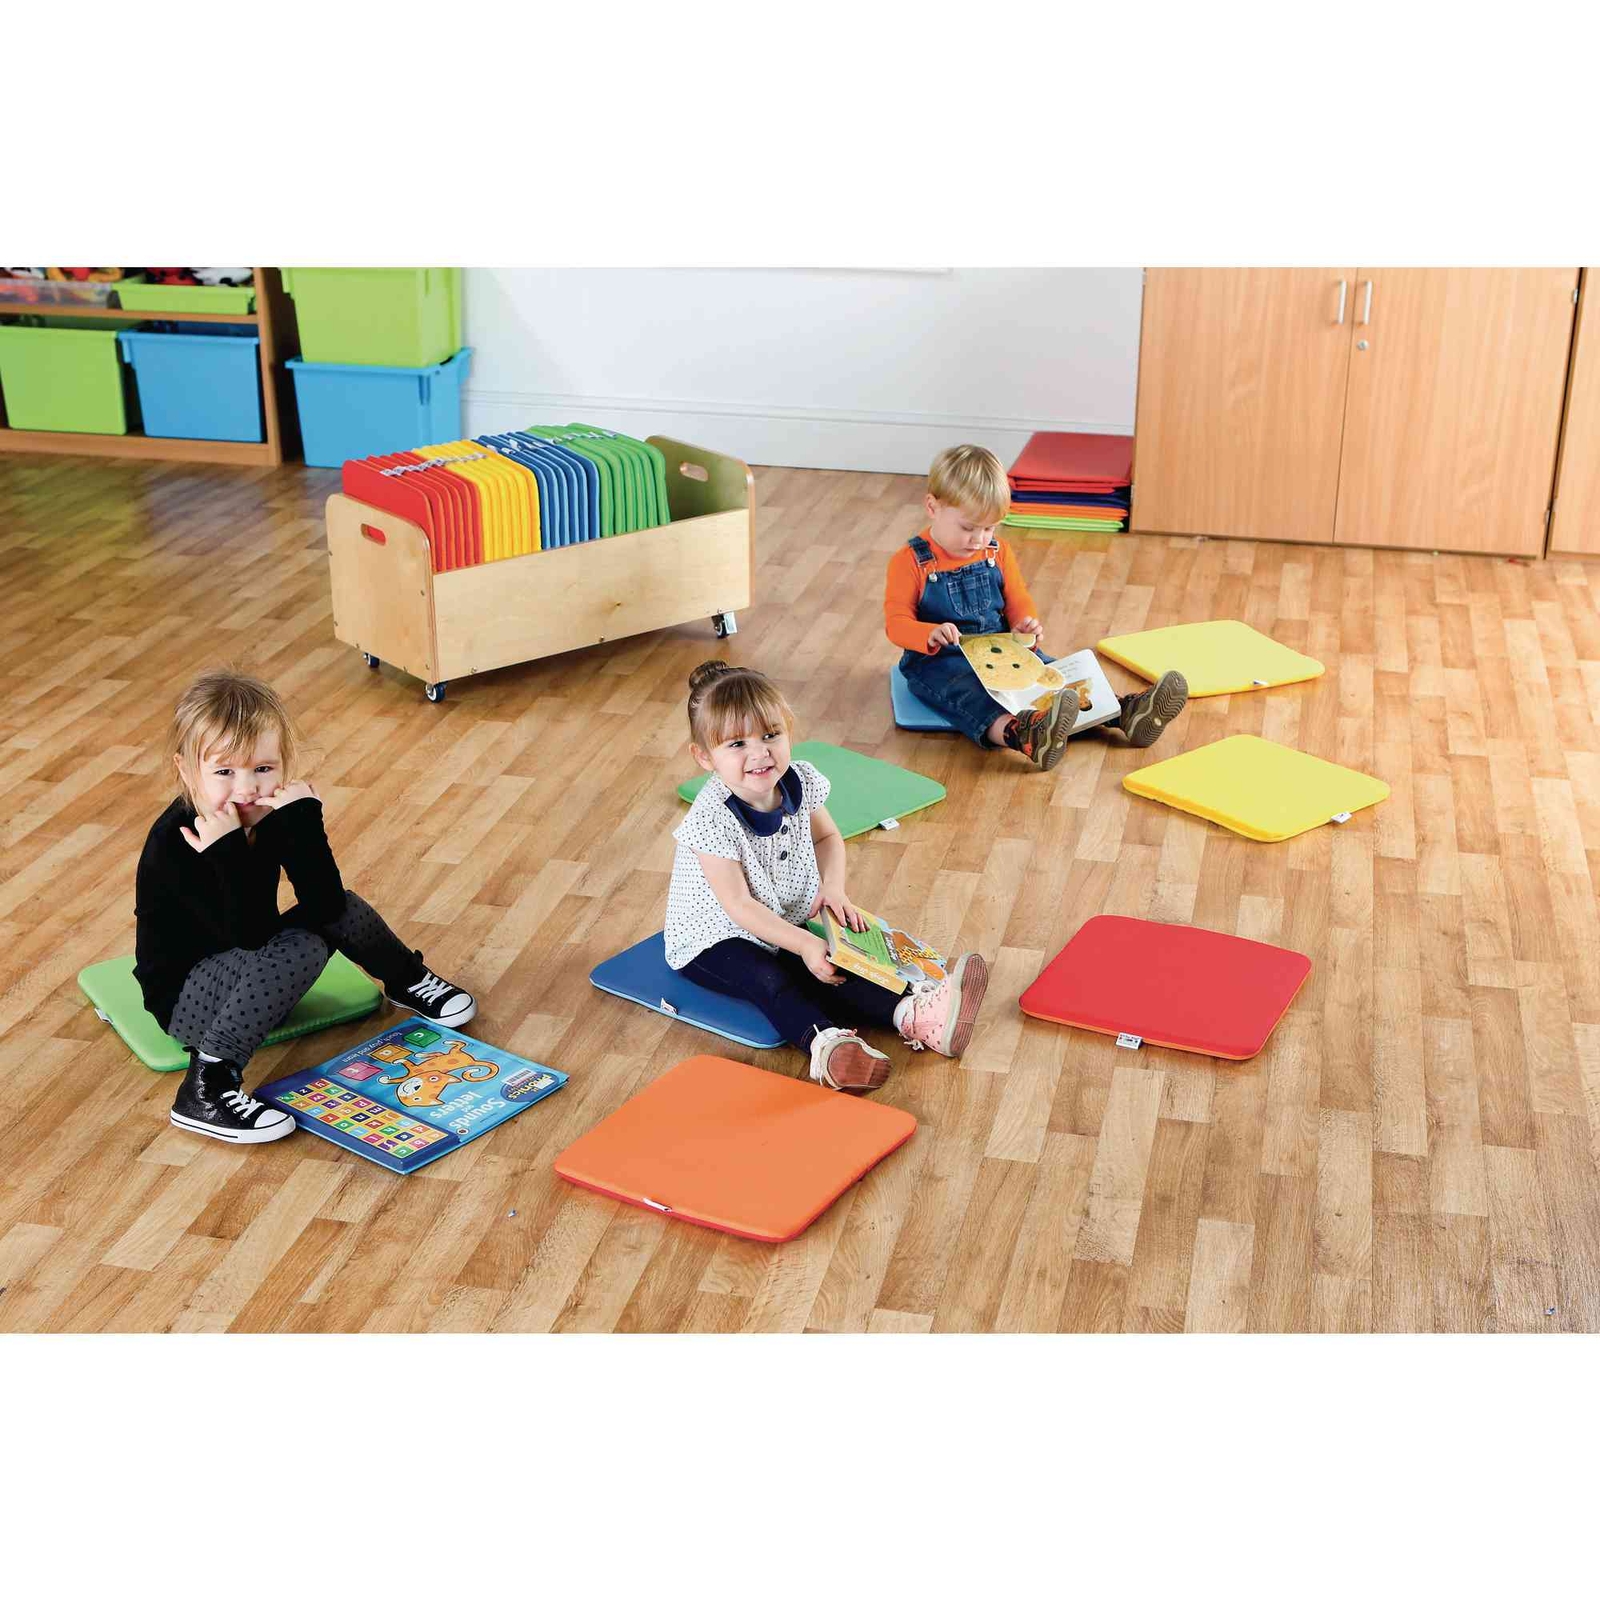 Rainbow Square Cushions and Tuf 2 Trolley